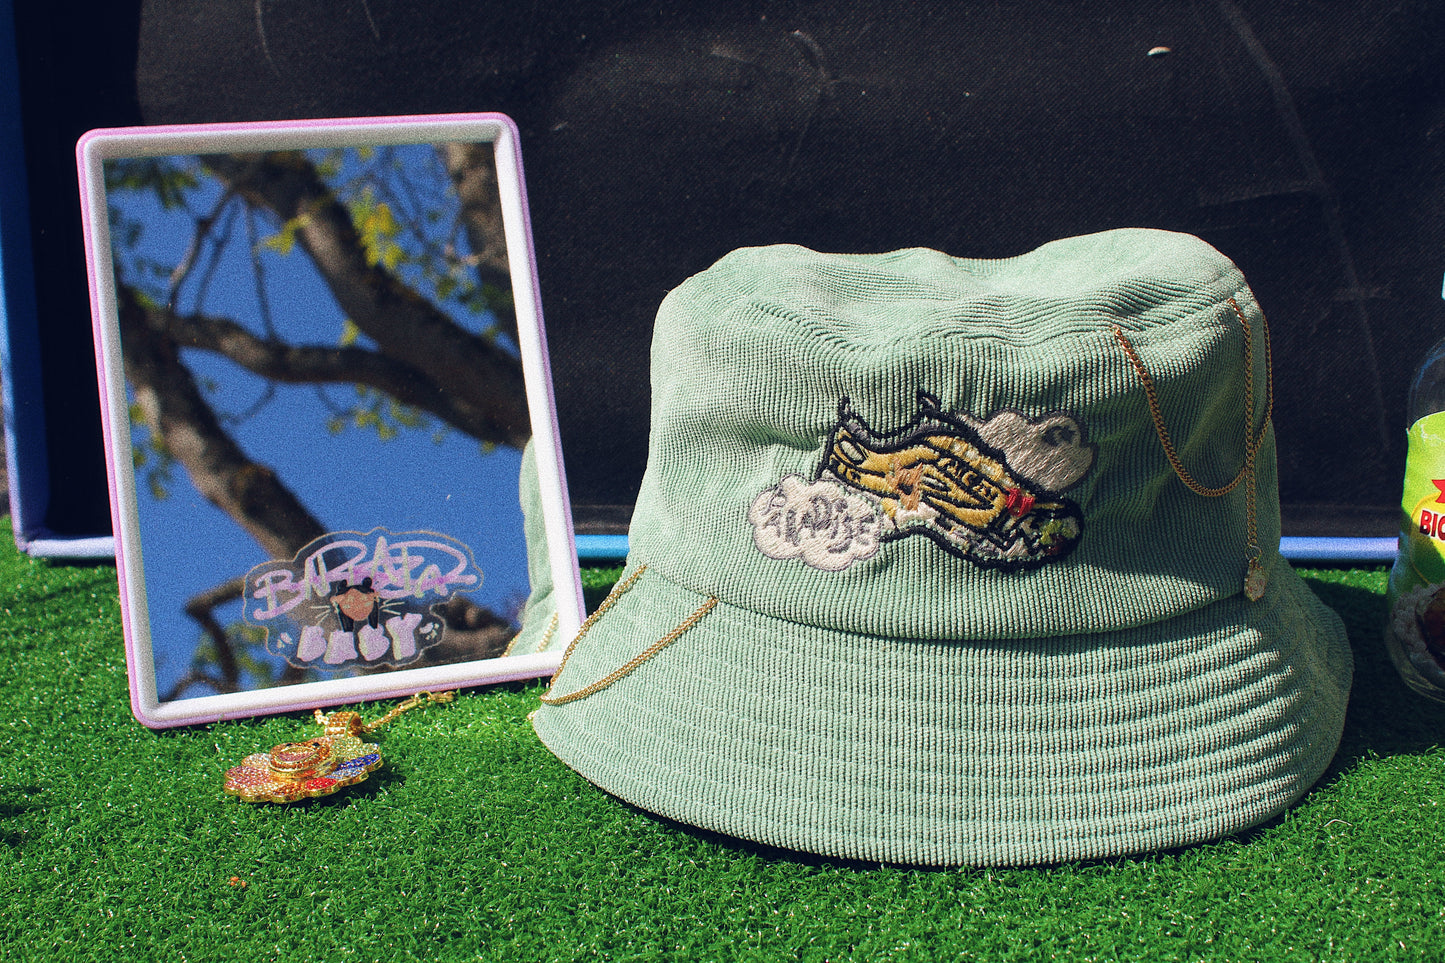 green track 5 paradise hat sitting on fake grass next to a mirror and gold necklace